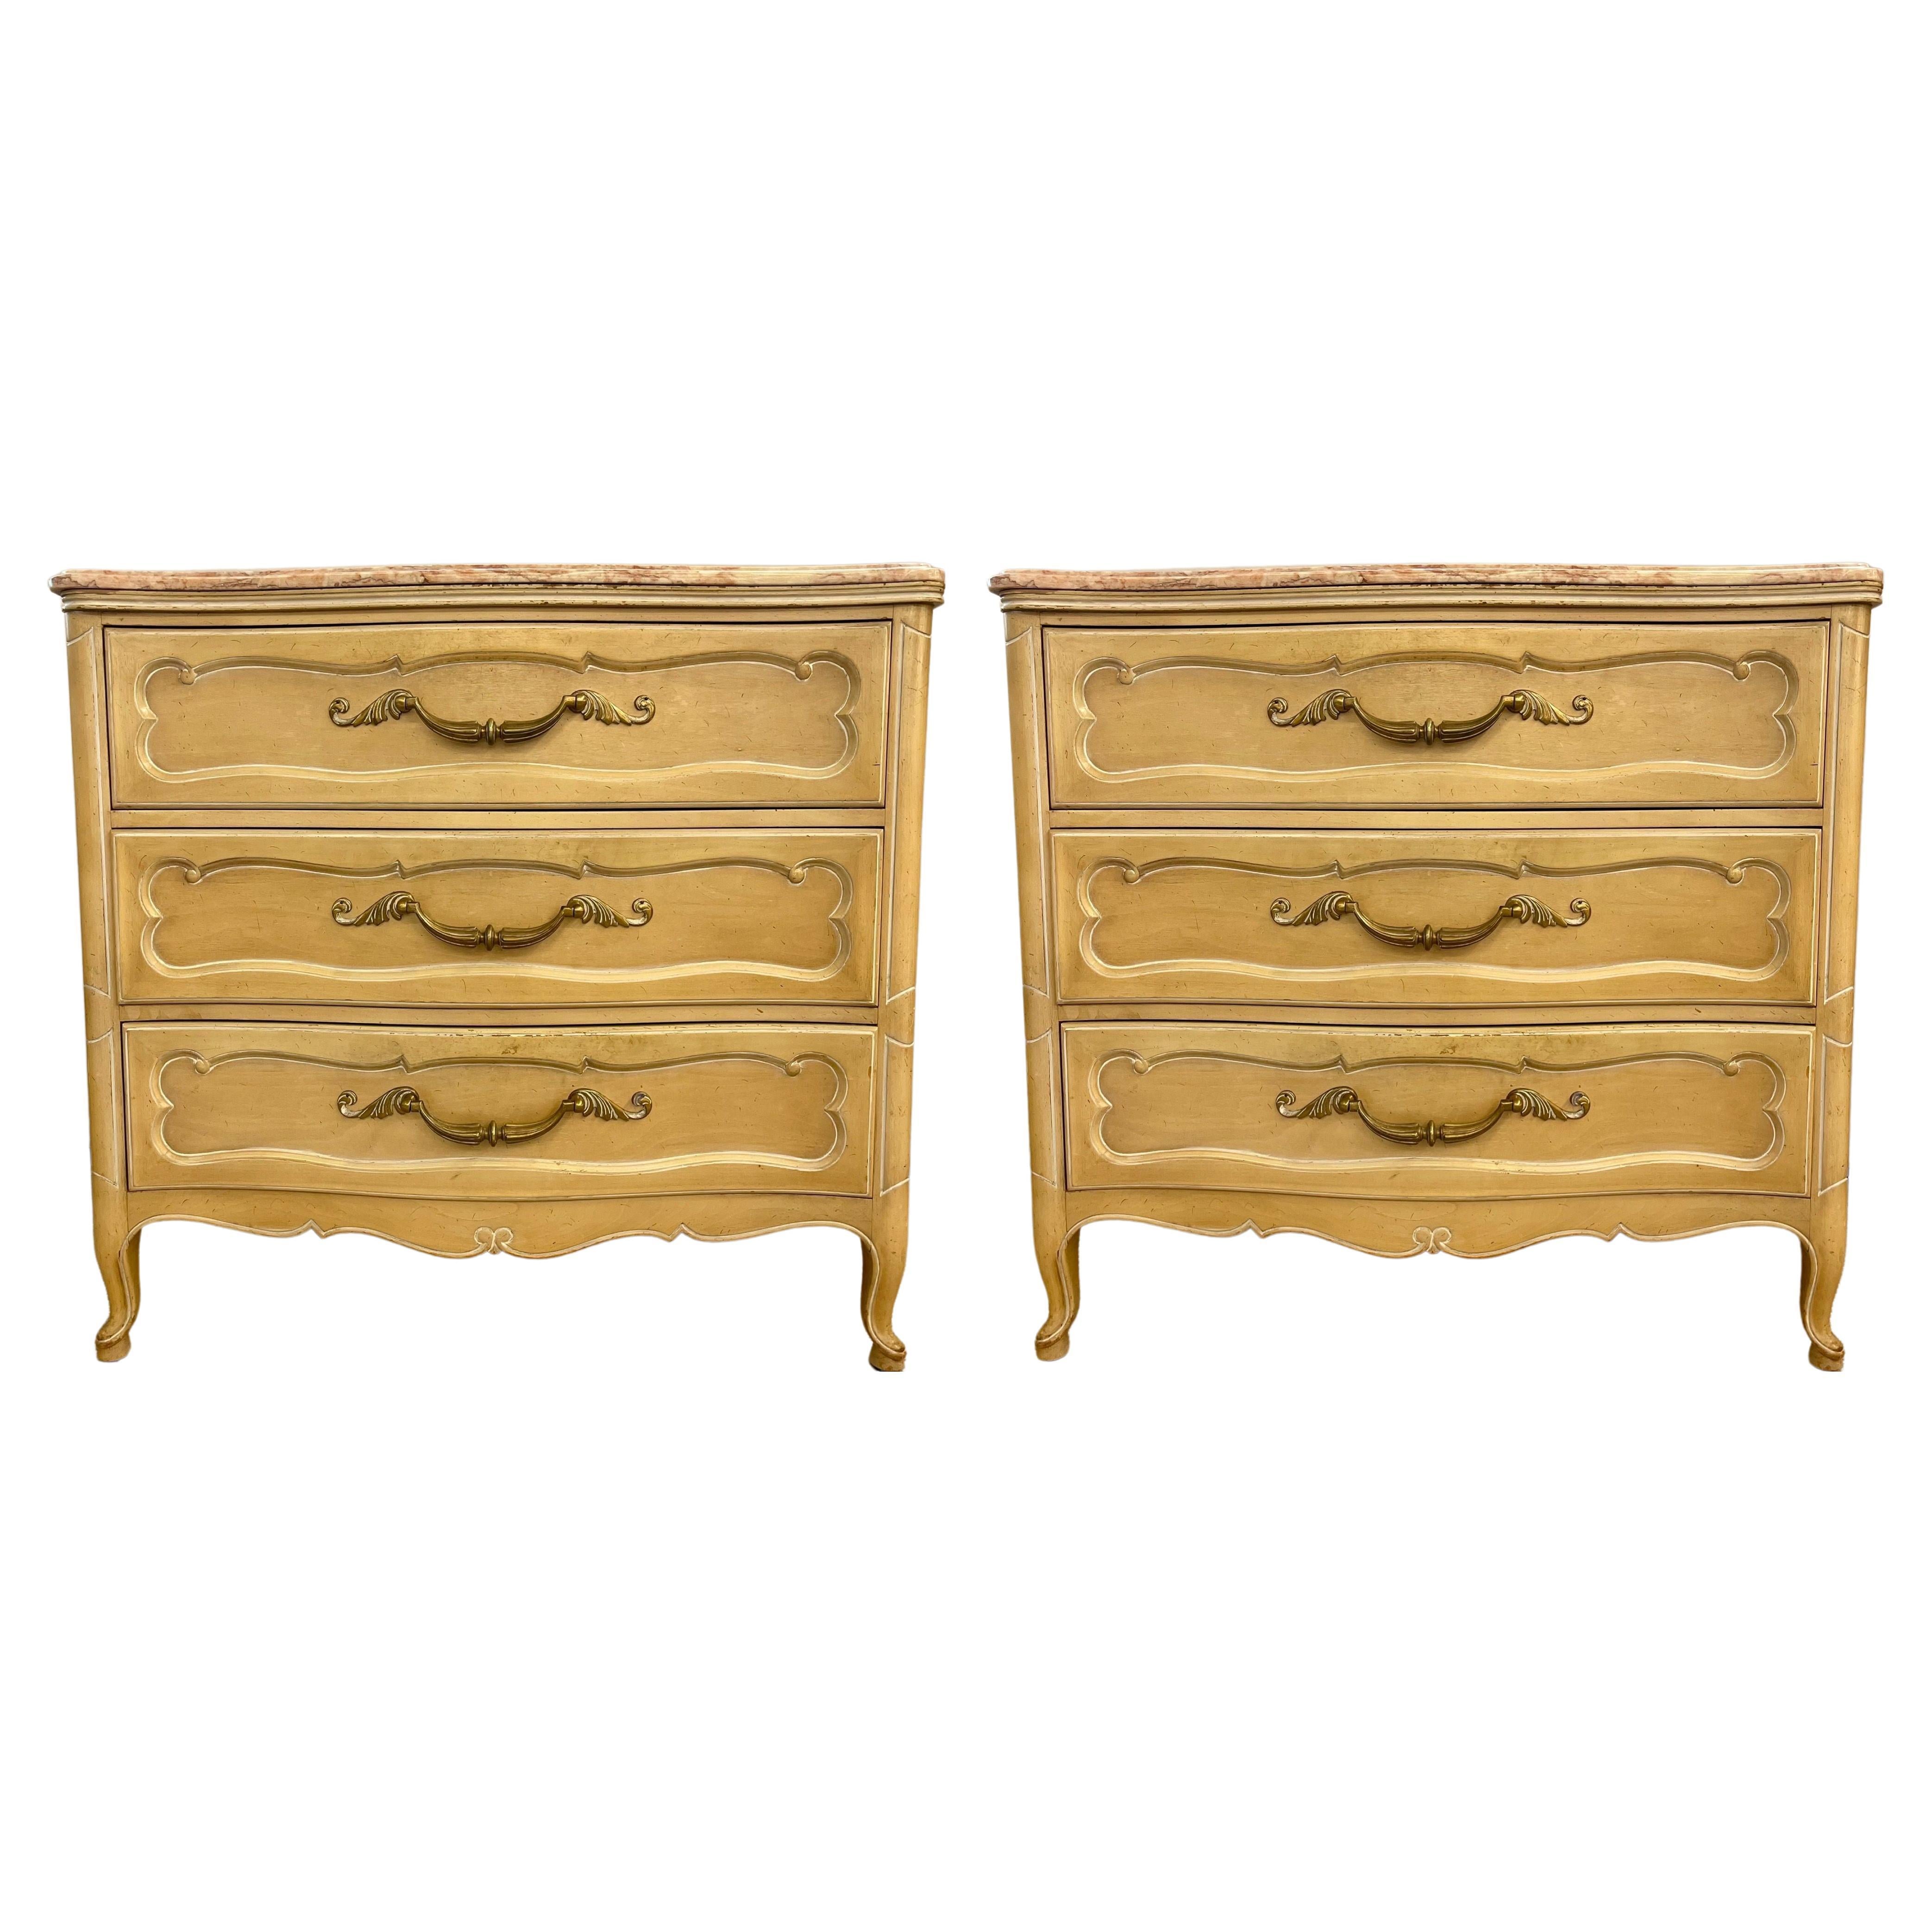 Pair Of Louis XV Style Grosfeld House Marble-Top Distressed Four-Drawer Commodes For Sale